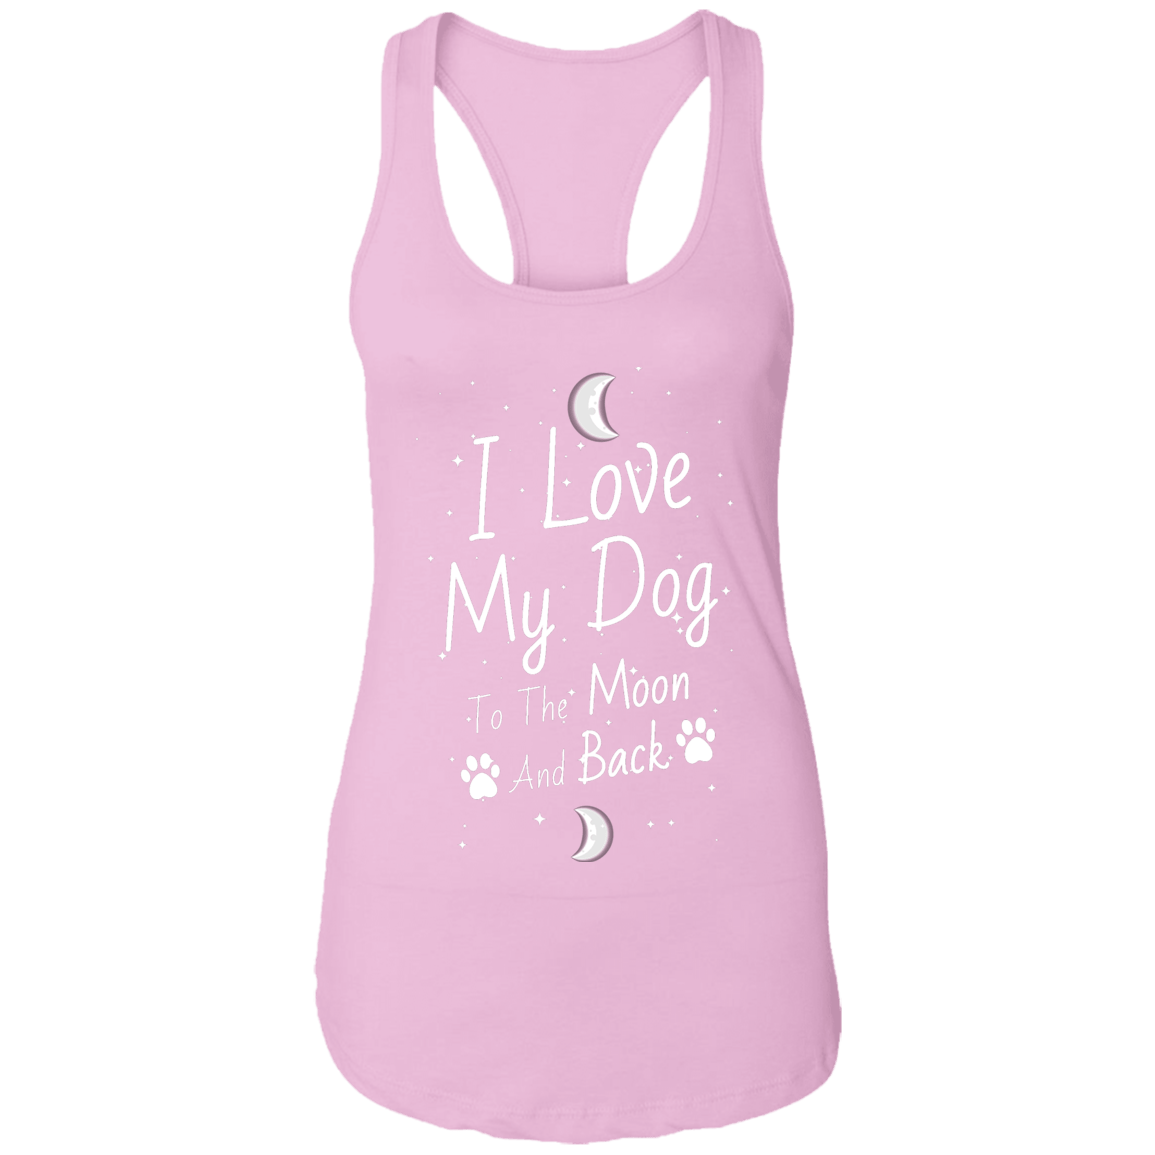 Moon And Back - Ladies Racer Back Tank.